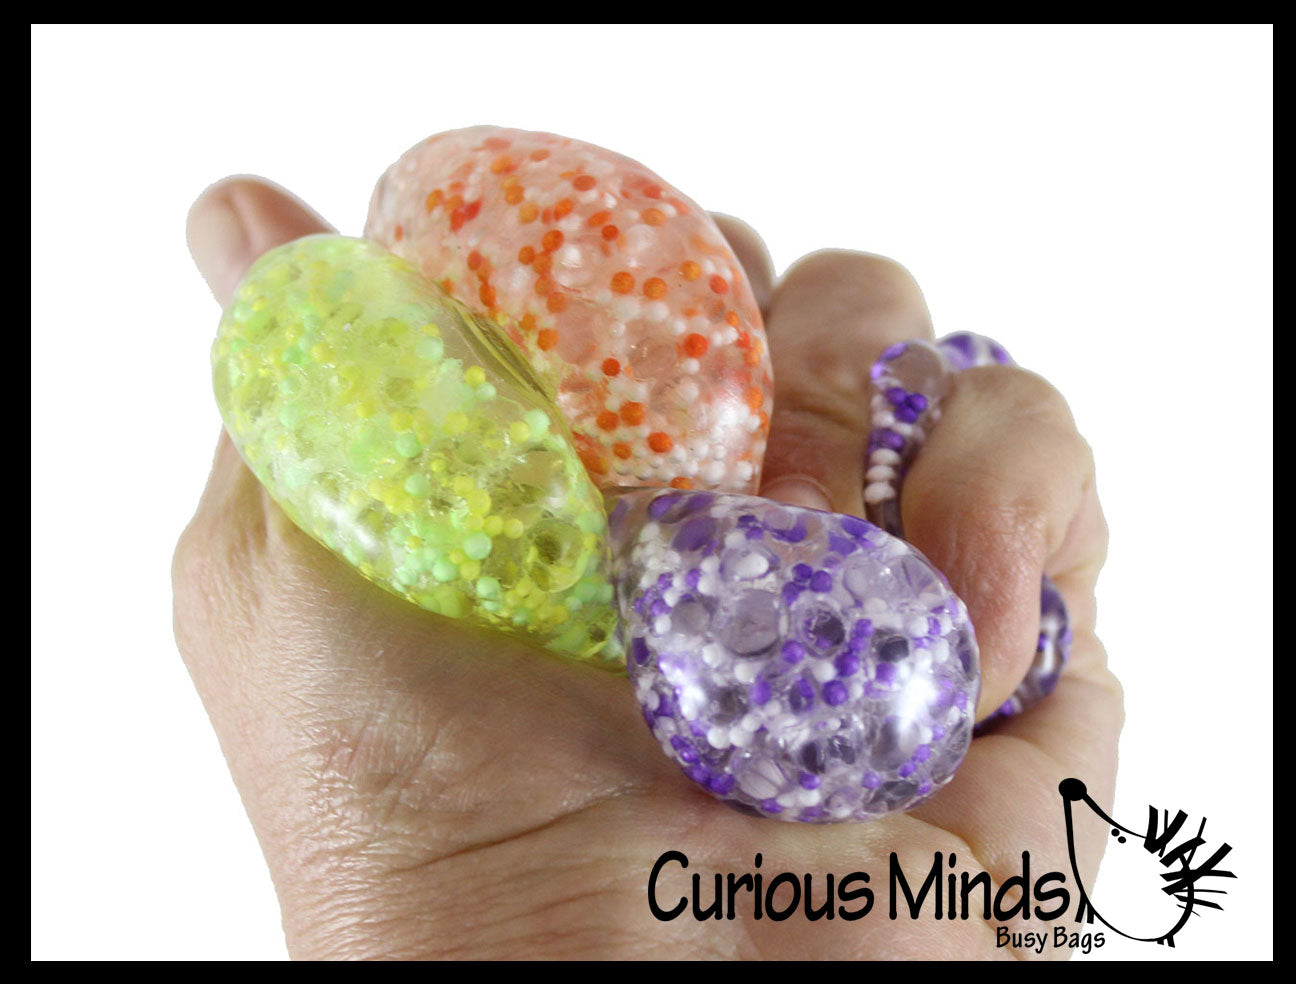 Set of 9 Mini Stress Balls - 3 Different Styles in 3 Packs - of Small Amazing 1.5